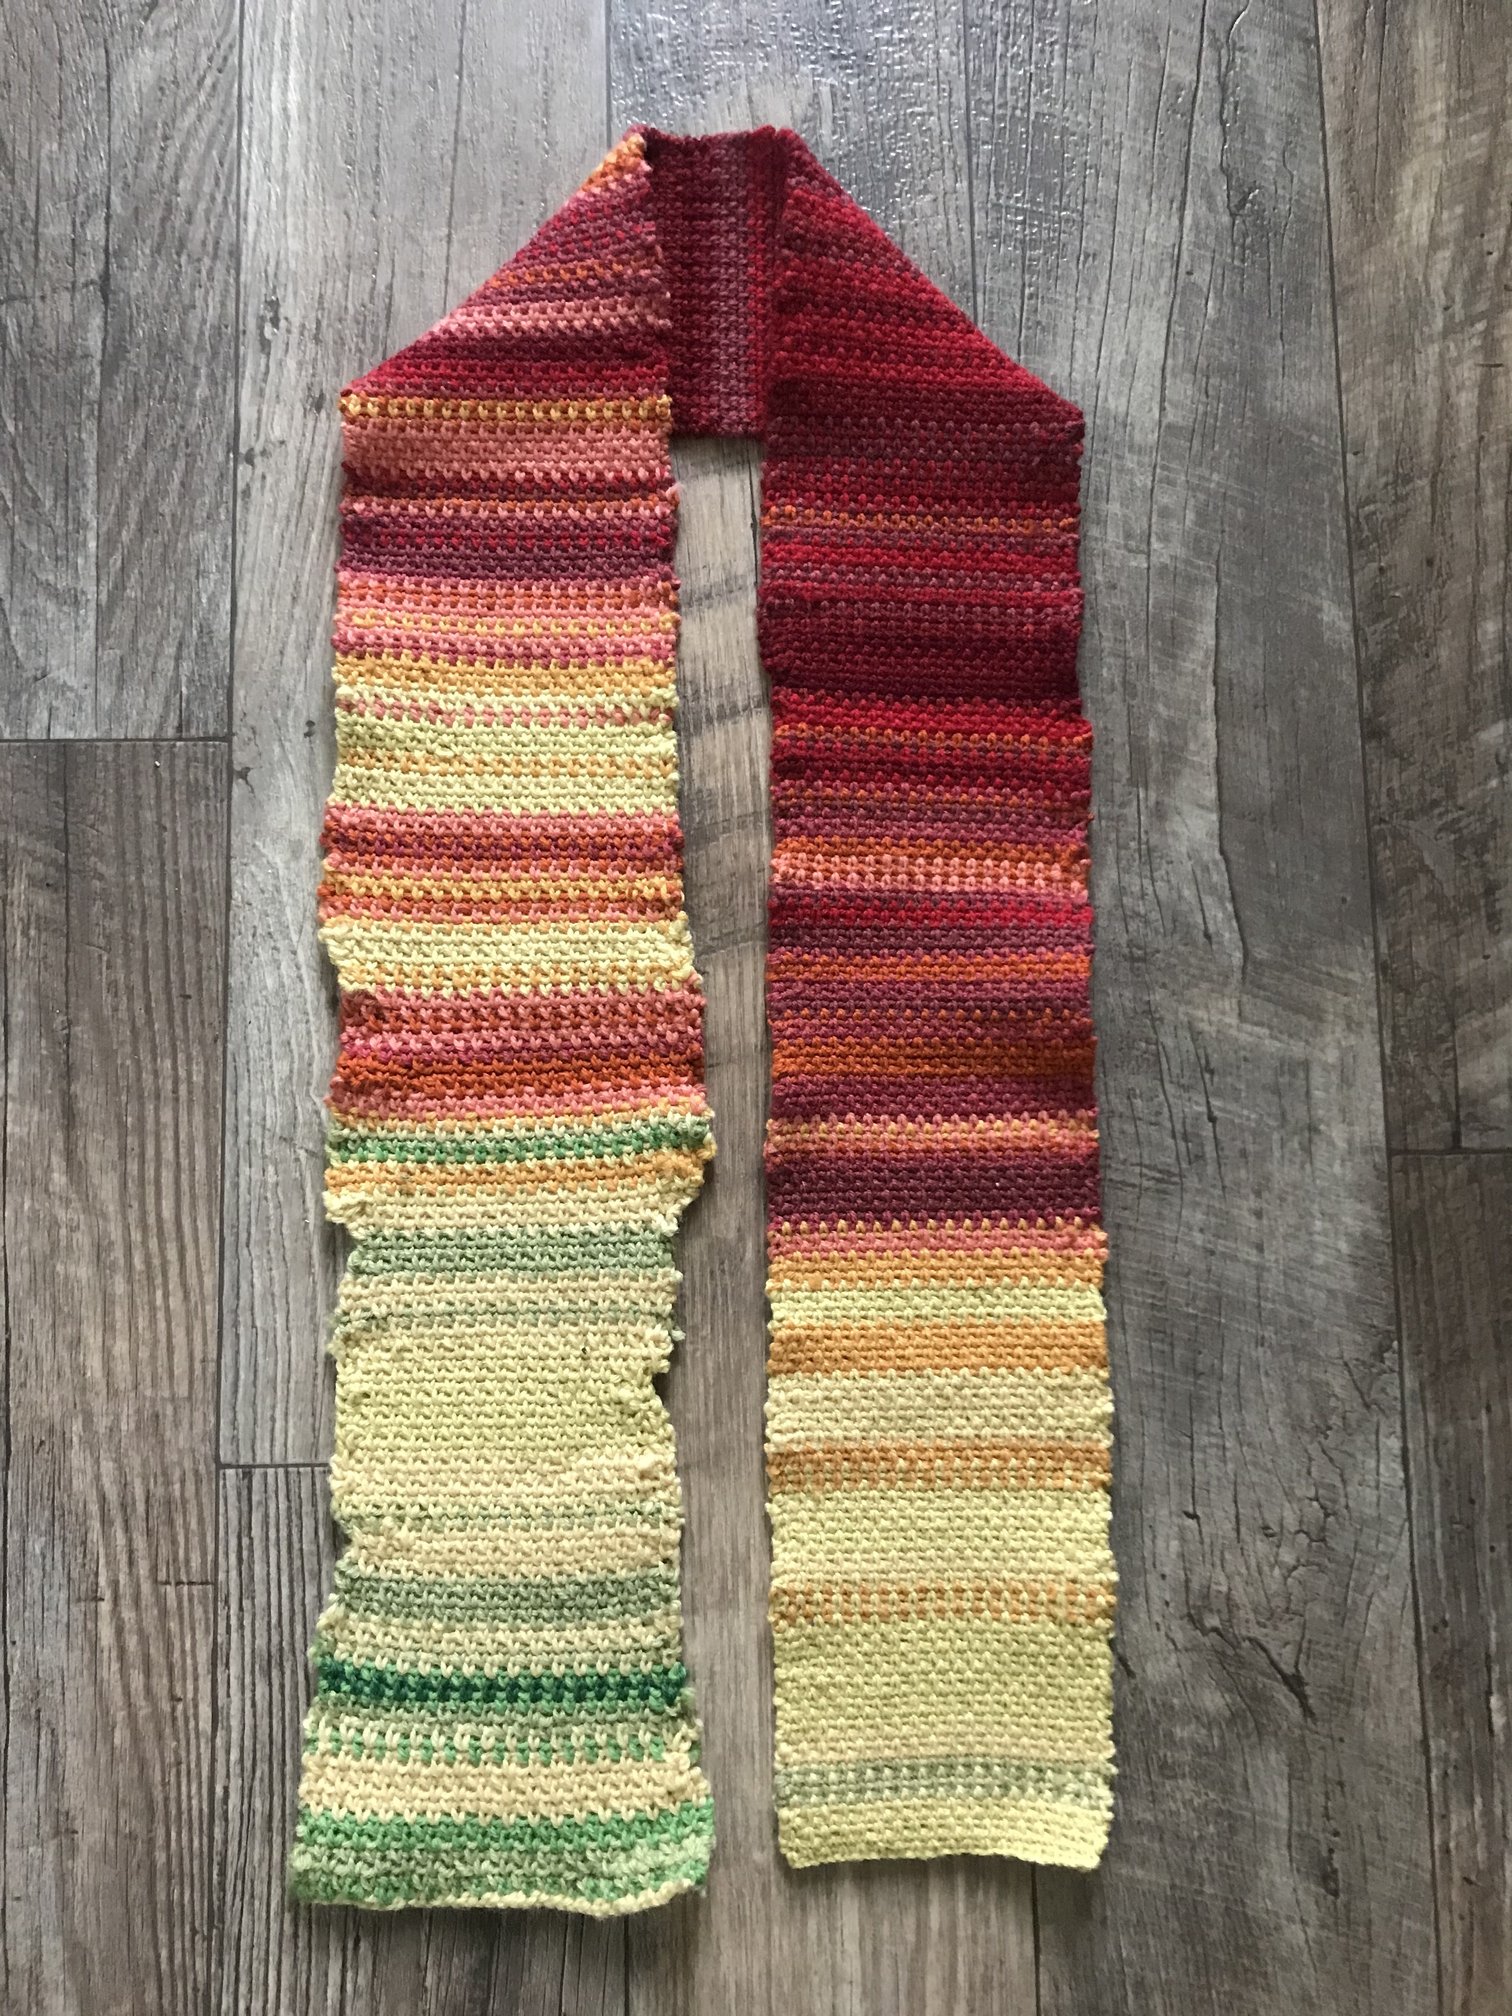 Scarf showing the daily temperatures of Davis in 2017